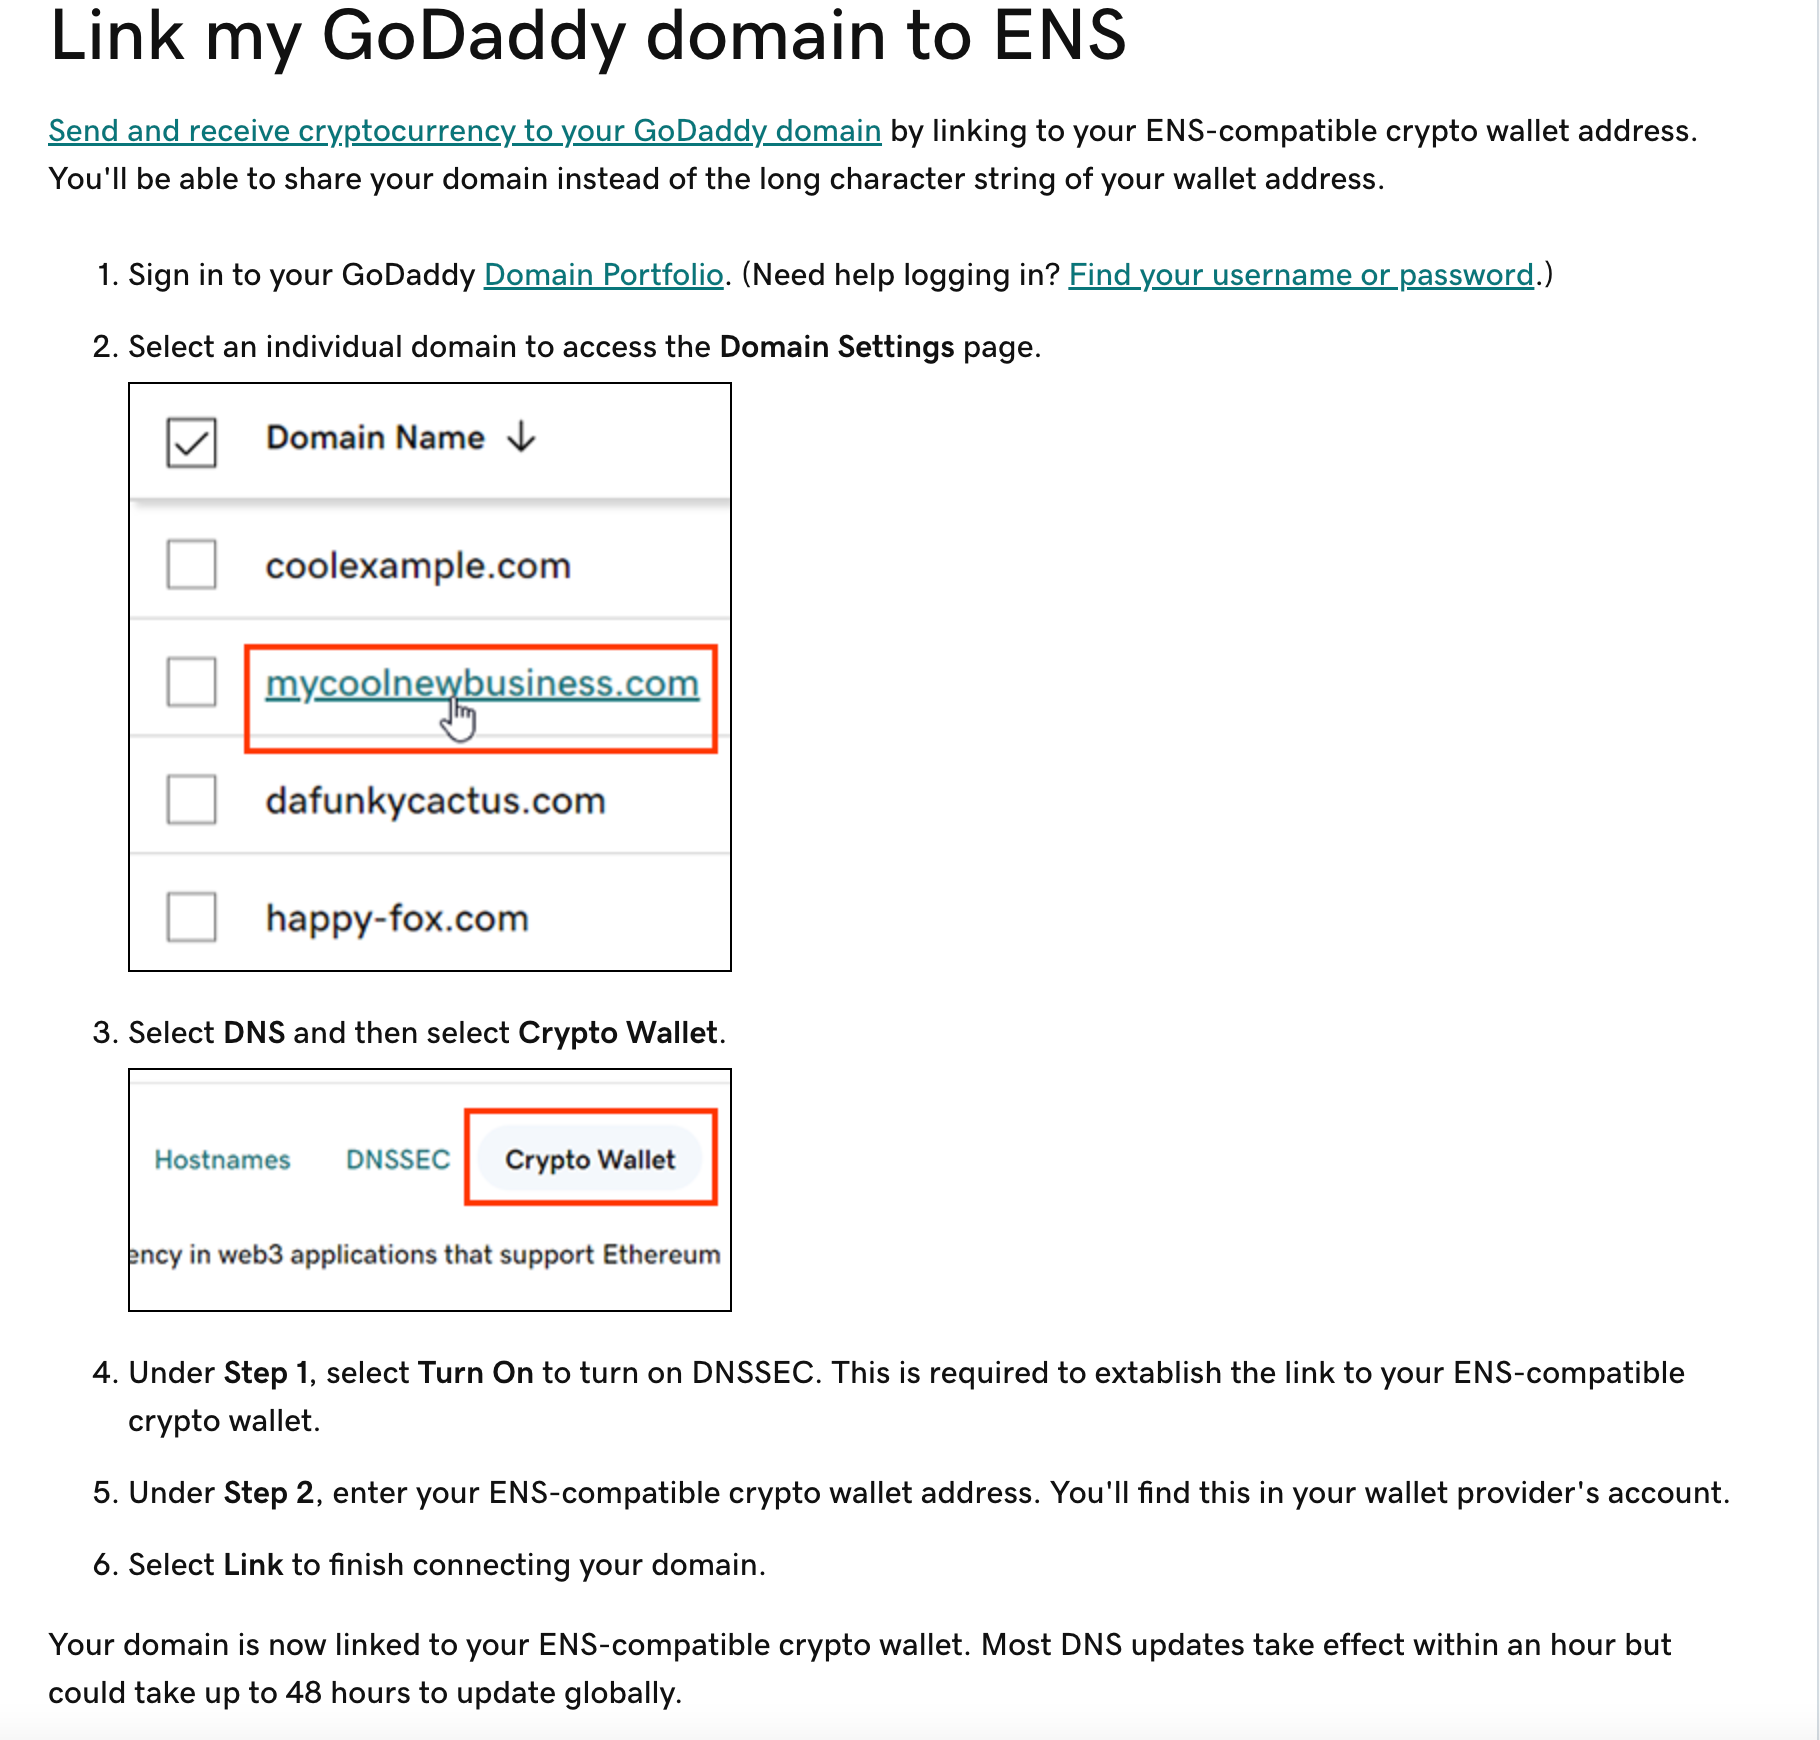 This images show instructions for connecting DNS to ENS on GoDaddy